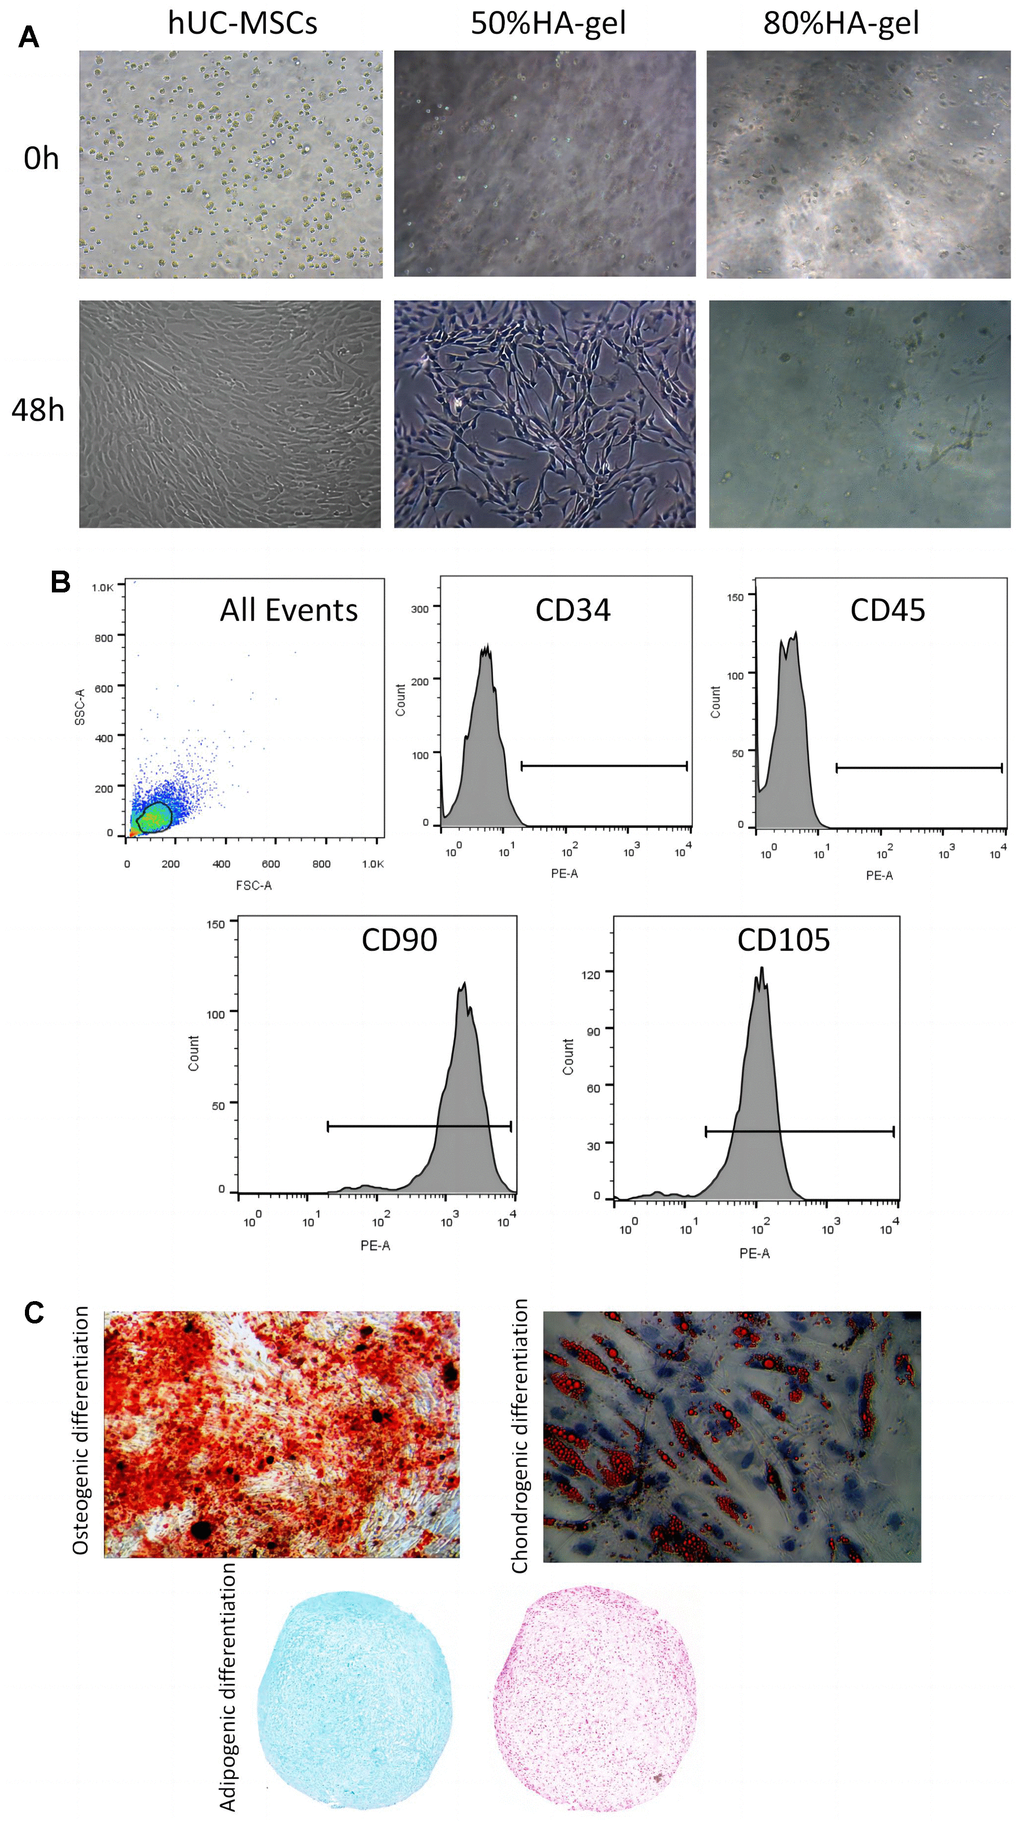 hUC-MSCs characteristics and differentiation potential. (A) The effect of HA-gel on the biological behavior of hUC-MSCs; (B) Surface markers characteristic of hUC-MSCs measured by flow cytometry; (C) The morphologic and intrinsic characterization of hUC-MSCs.